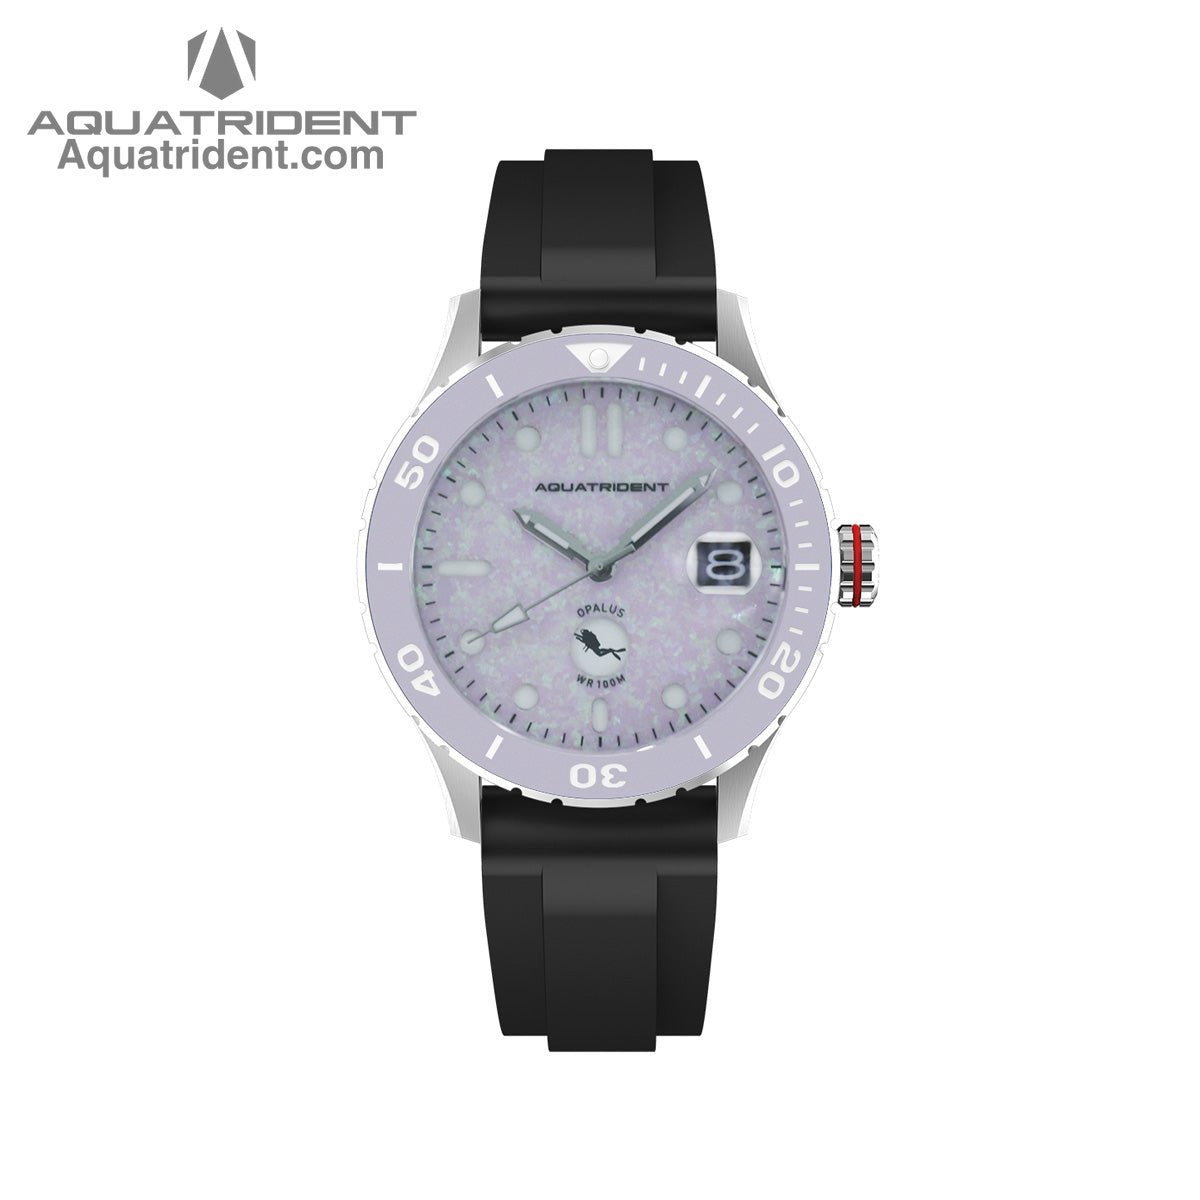 Aquatrident's Ocean Automatic Watch with Ceramic，Rotating, 120 clicks Bezel and violet opal Dial front view